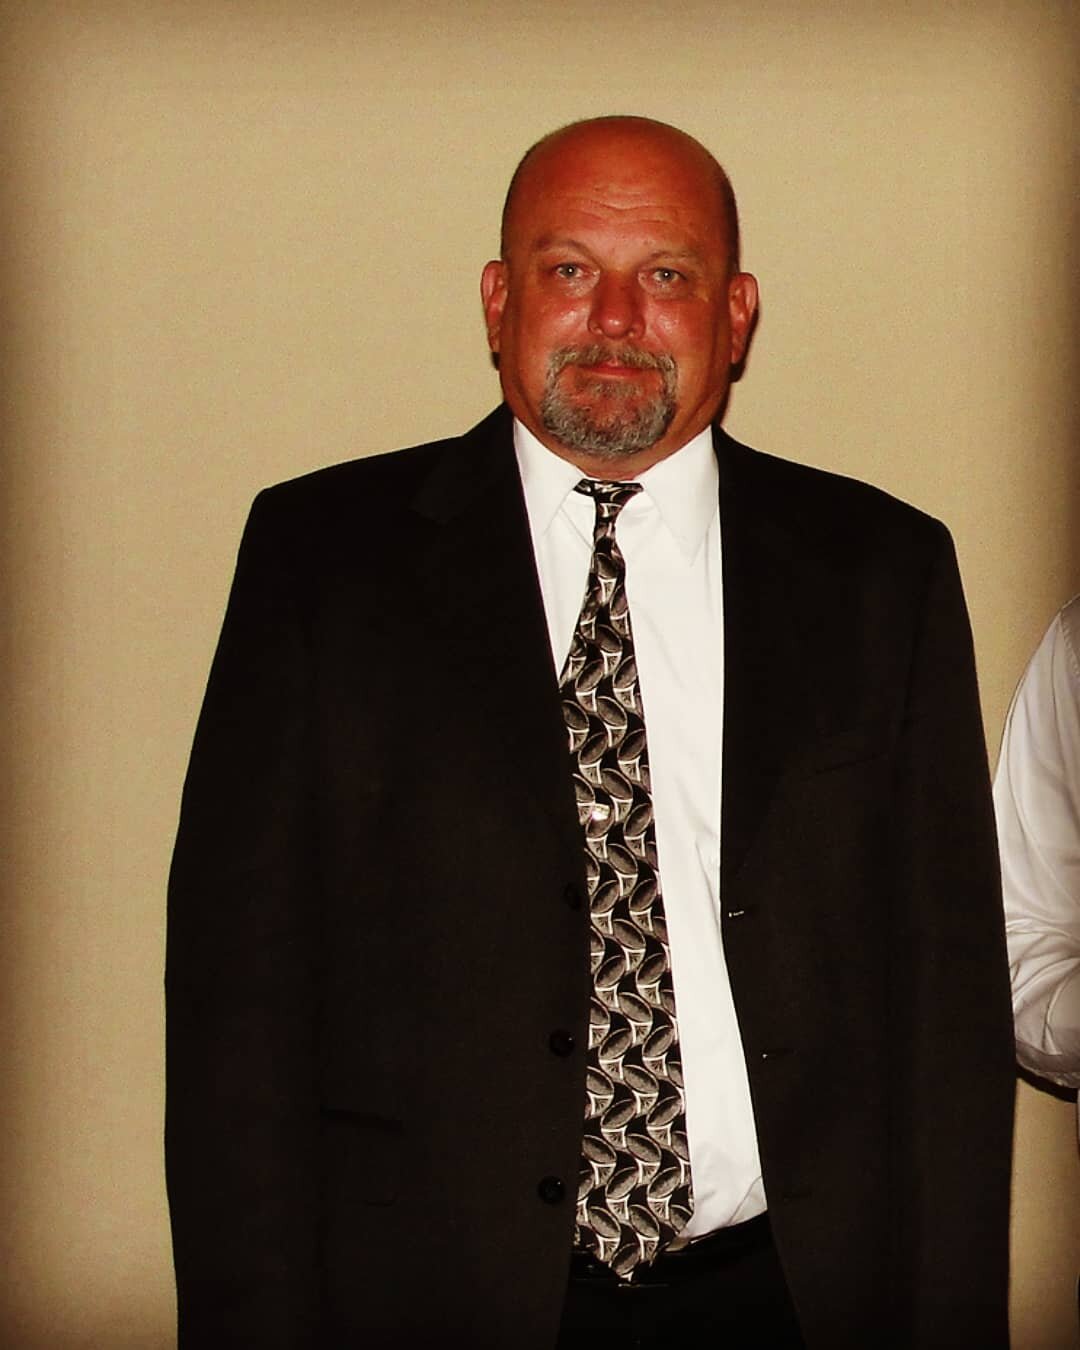 It is with great sadness that former BM-L92 Business Manager Mark Thomas passed away yesterday on 1/17/2021. We send our condolences to the Thomas Family 🙏